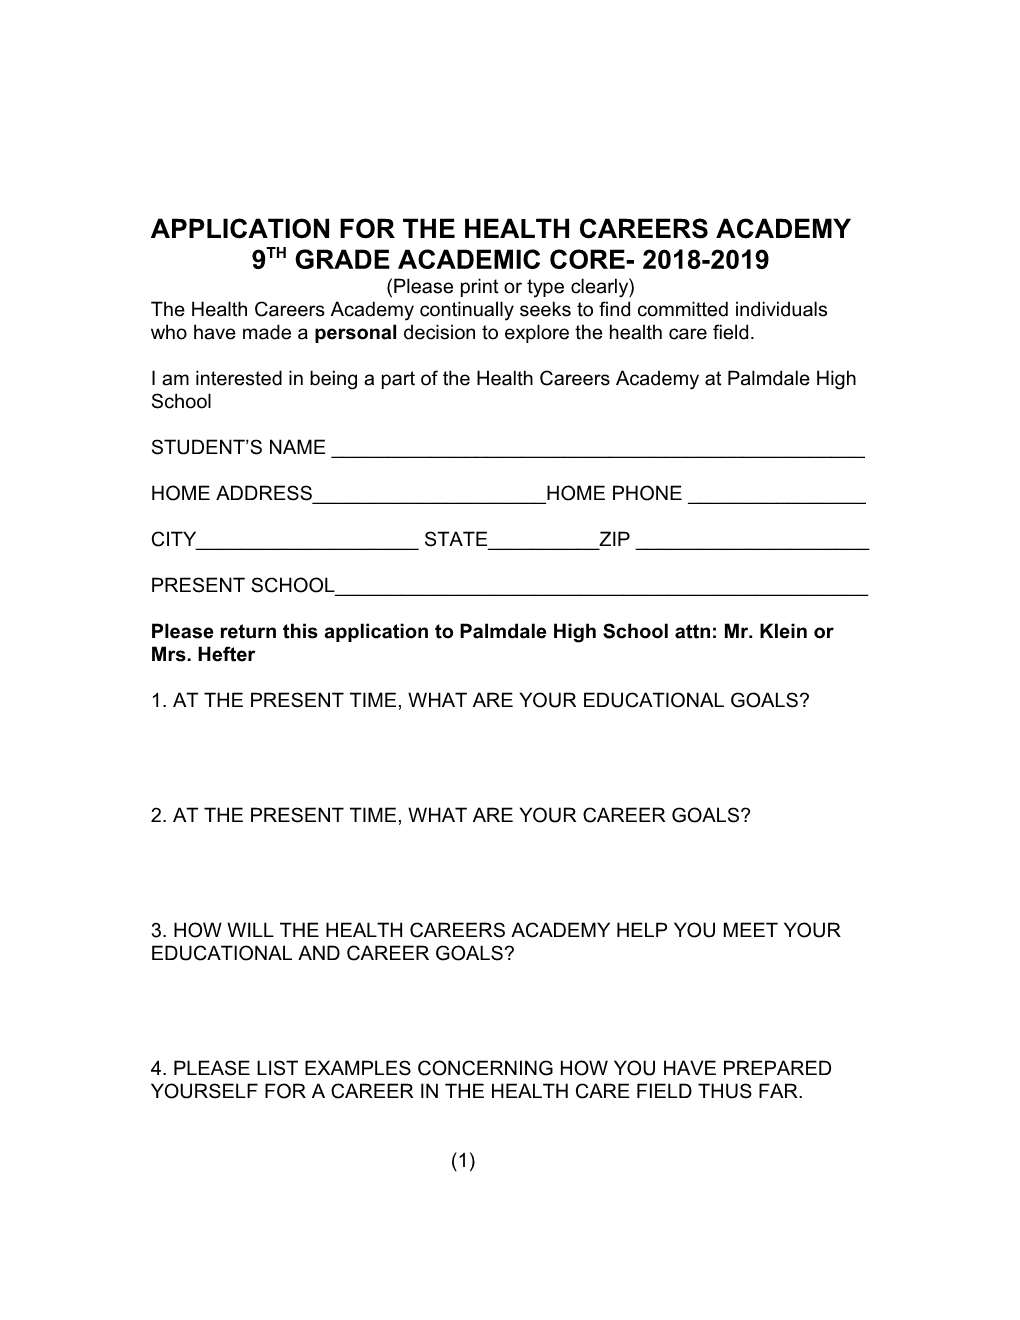 Application for the Health Careers Academy